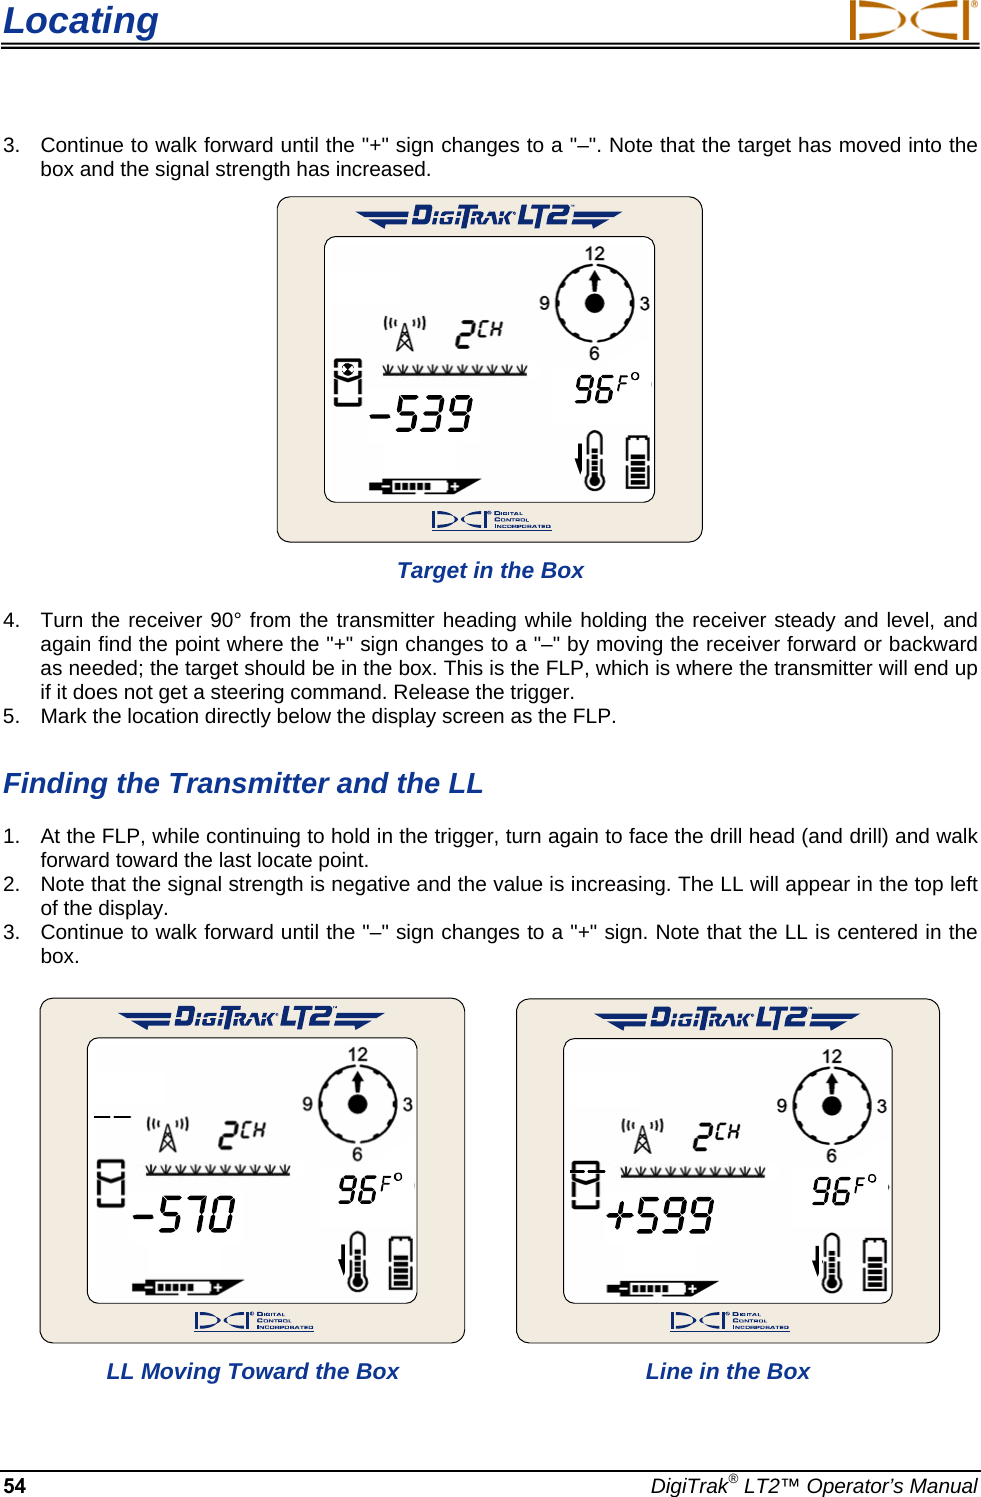 Locating  3.  Continue to walk forward until the &quot;+&quot; sign changes to a &quot;–&quot;. Note that the target has moved into the box and the signal strength has increased.   Target in the Box  4.  Turn the receiver 90° from the transmitter heading while holding the receiver steady and level, and again find the point where the &quot;+&quot; sign changes to a &quot;–&quot; by moving the receiver forward or backward as needed; the target should be in the box. This is the FLP, which is where the transmitter will end up if it does not get a steering command. Release the trigger.  5.  Mark the location directly below the display screen as the FLP.  Finding the Transmitter and the LL  1.  At the FLP, while continuing to hold in the trigger, turn again to face the drill head (and drill) and walk forward toward the last locate point.  2.  Note that the signal strength is negative and the value is increasing. The LL will appear in the top left of the display.  3.  Continue to walk forward until the &quot;–&quot; sign changes to a &quot;+&quot; sign. Note that the LL is centered in the box.         LL Moving Toward the Box  Line in the Box  54  DigiTrak® LT2™ Operator’s Manual 